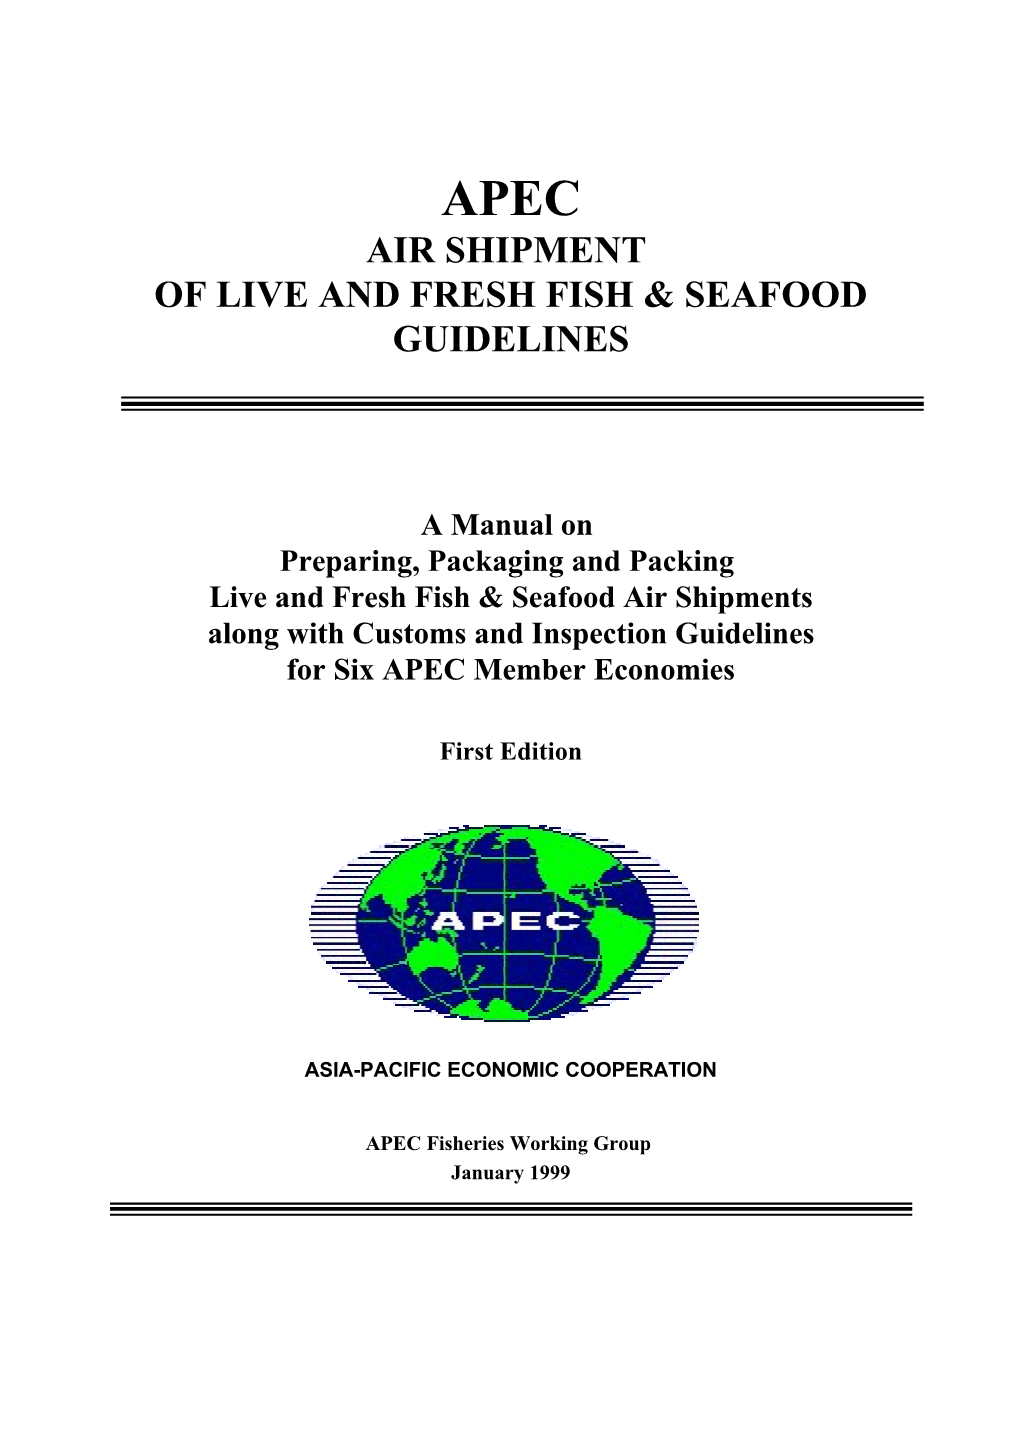 APEC Air Shipment of Live and Fresh Fish & Seafood Guidelines